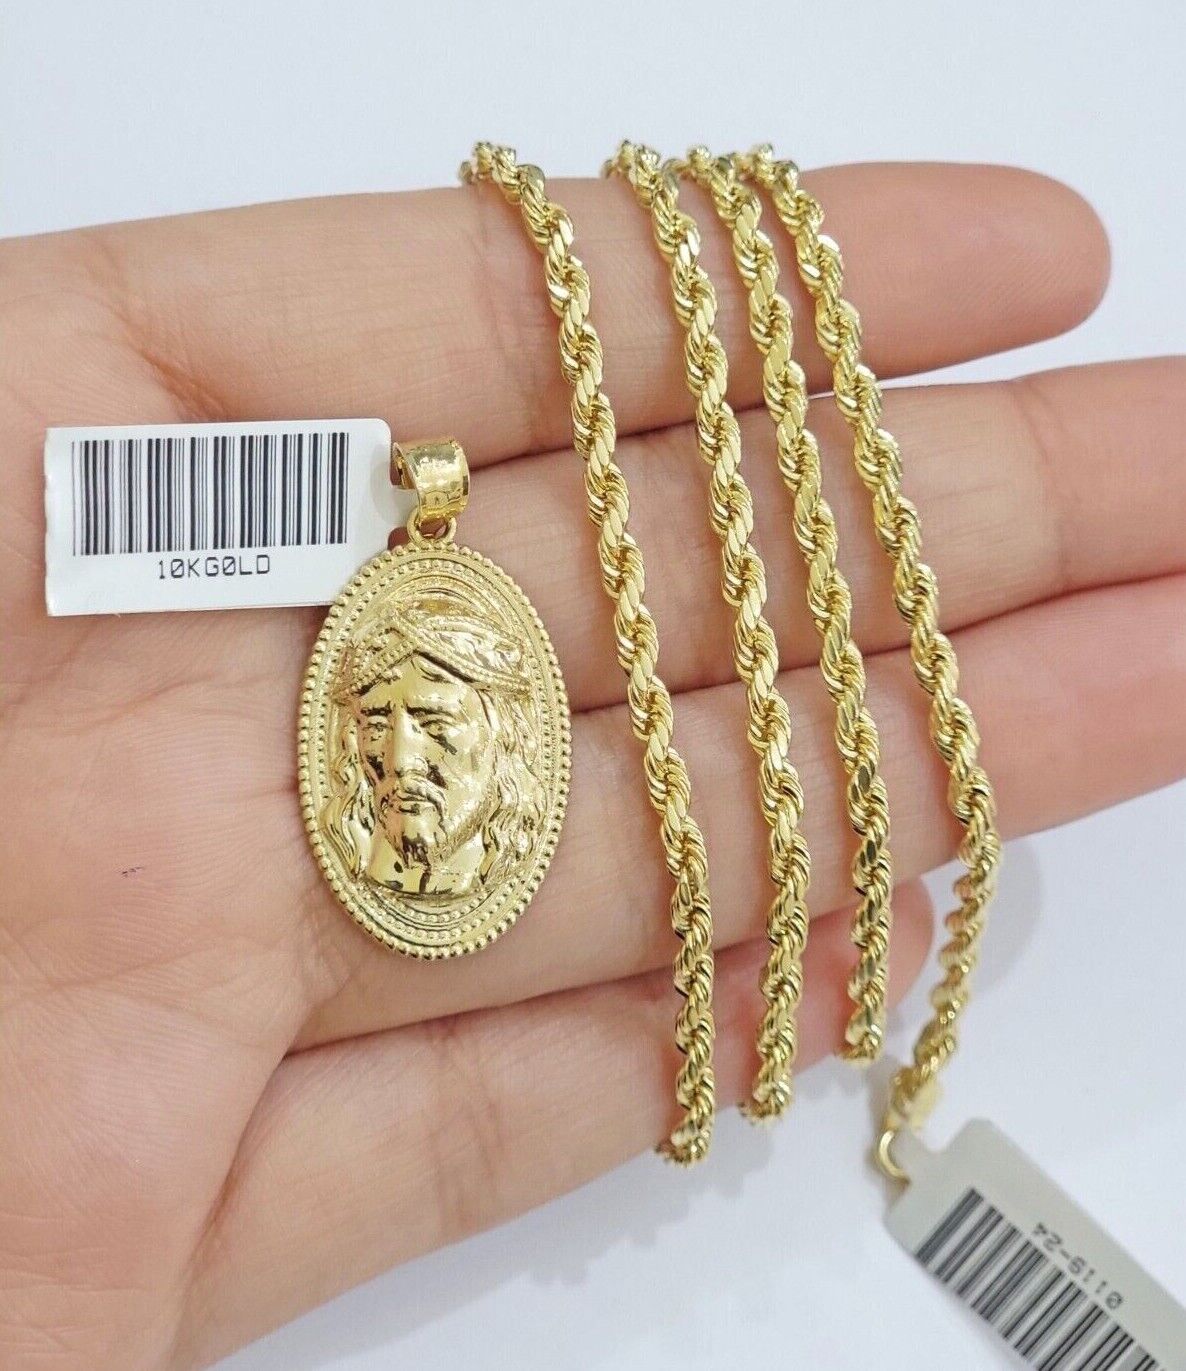 10k Gold Rope Chain Jesus Head Charm Pendant Set 18-28" Inch 3mm Necklace REAL